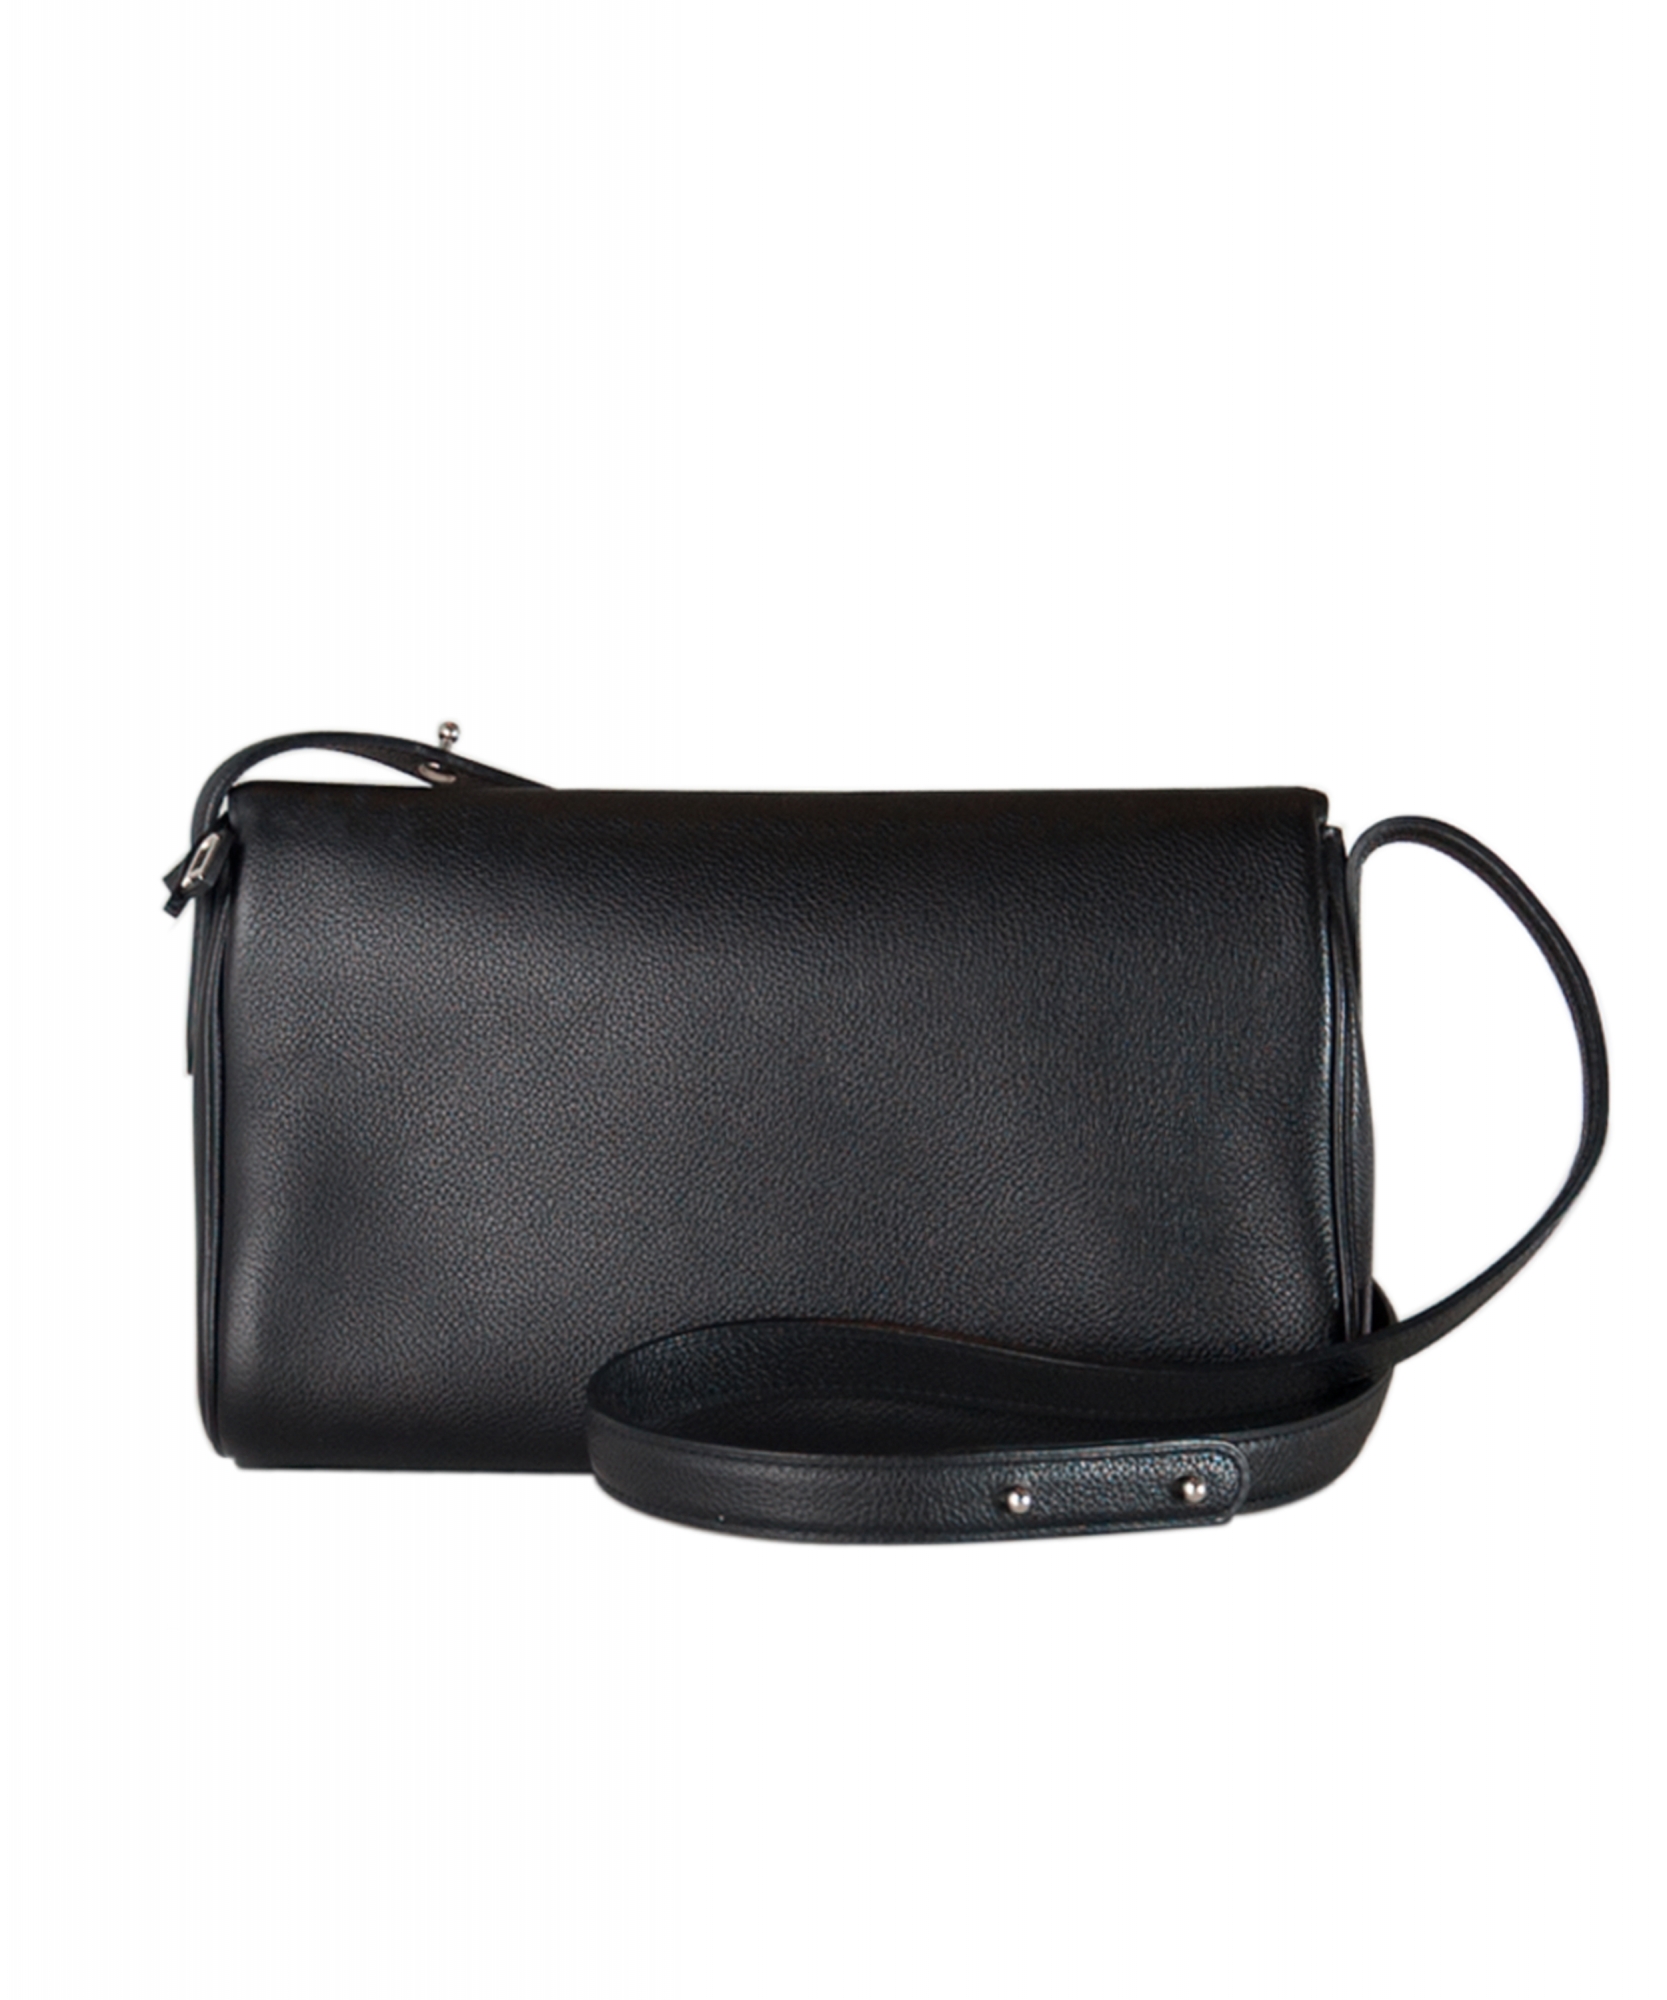 Delvaux Pebbled Leather Crossbody Bag